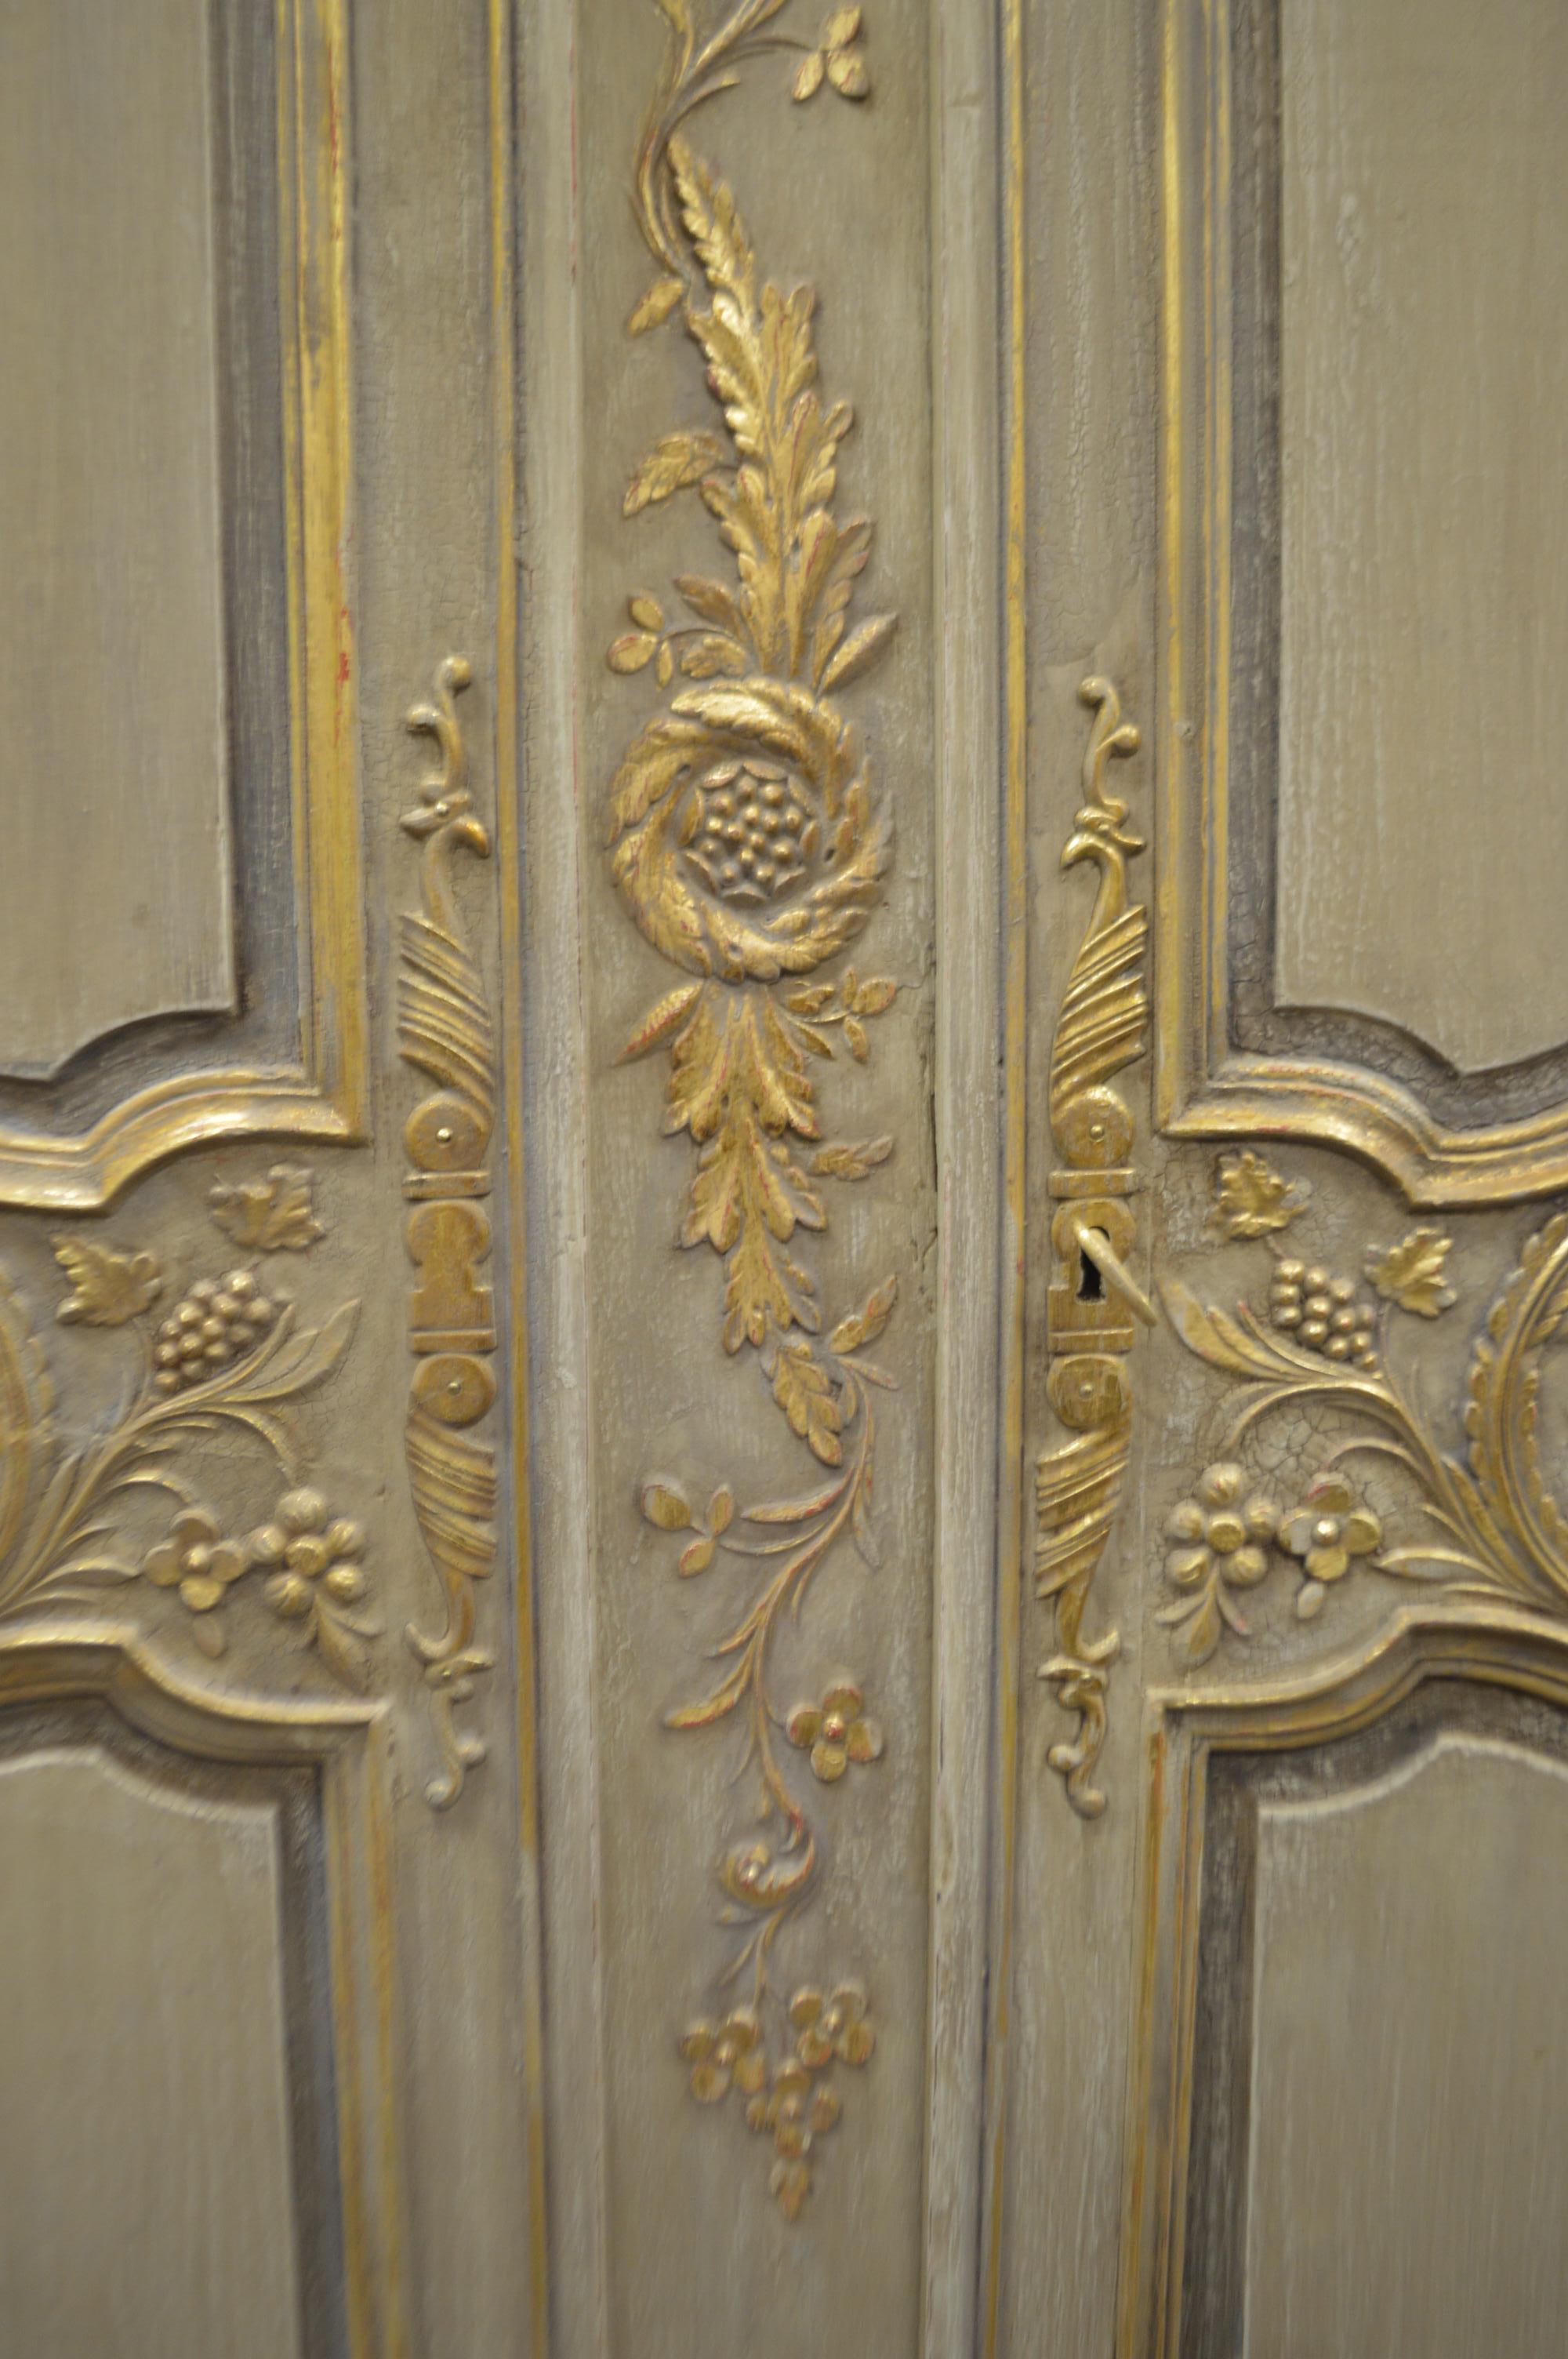 Louis XV Style Highly Decorative Painted Armoire with Gilt Details, 5 Shelves (Louis XV.)